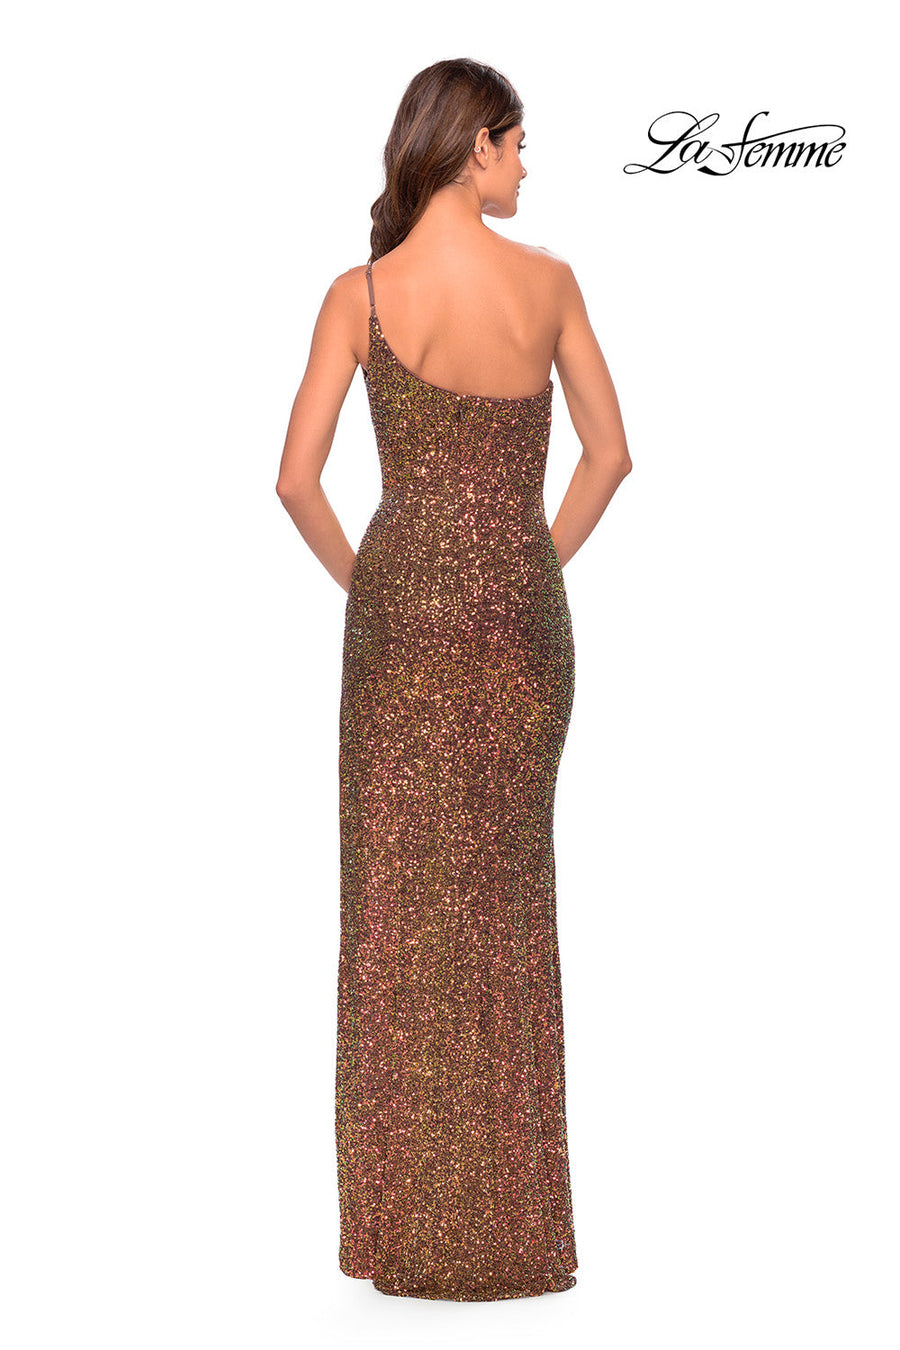 La Femme 31426 prom dress images.  La Femme 31426 is available in these colors: Bronze.